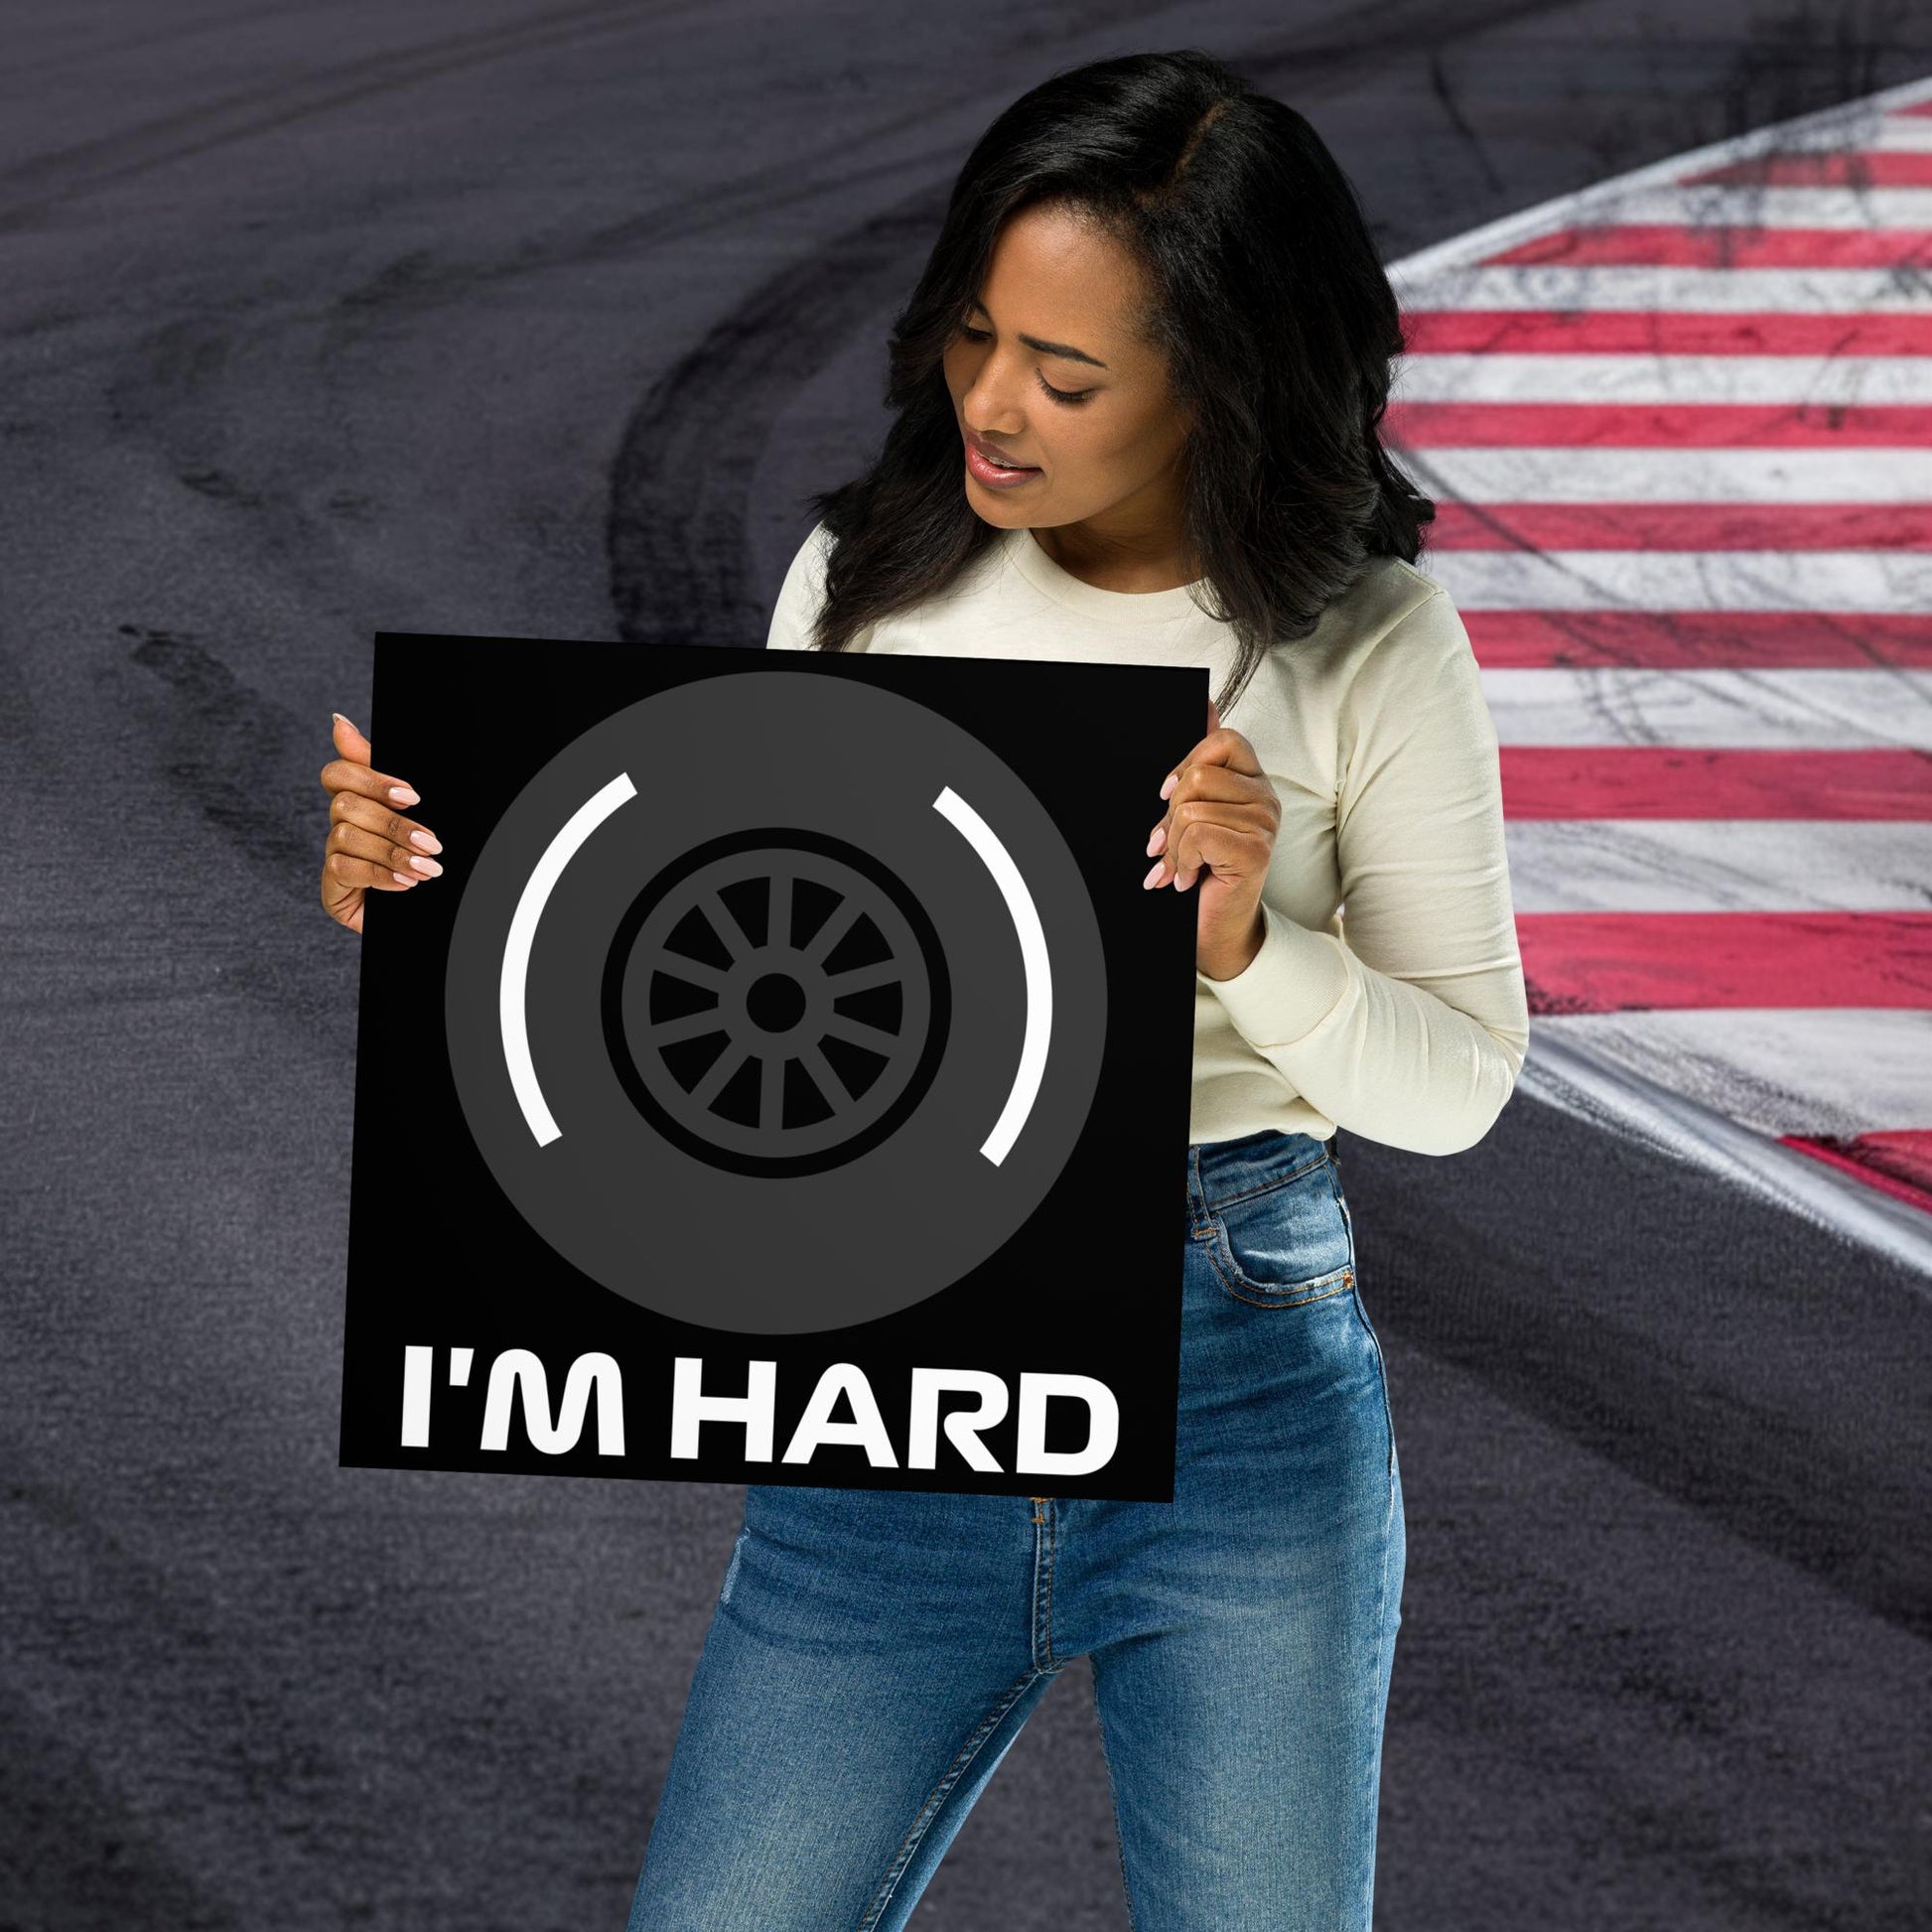 I'm Hard Tyres Funny F1 Poster Next Cult Brand